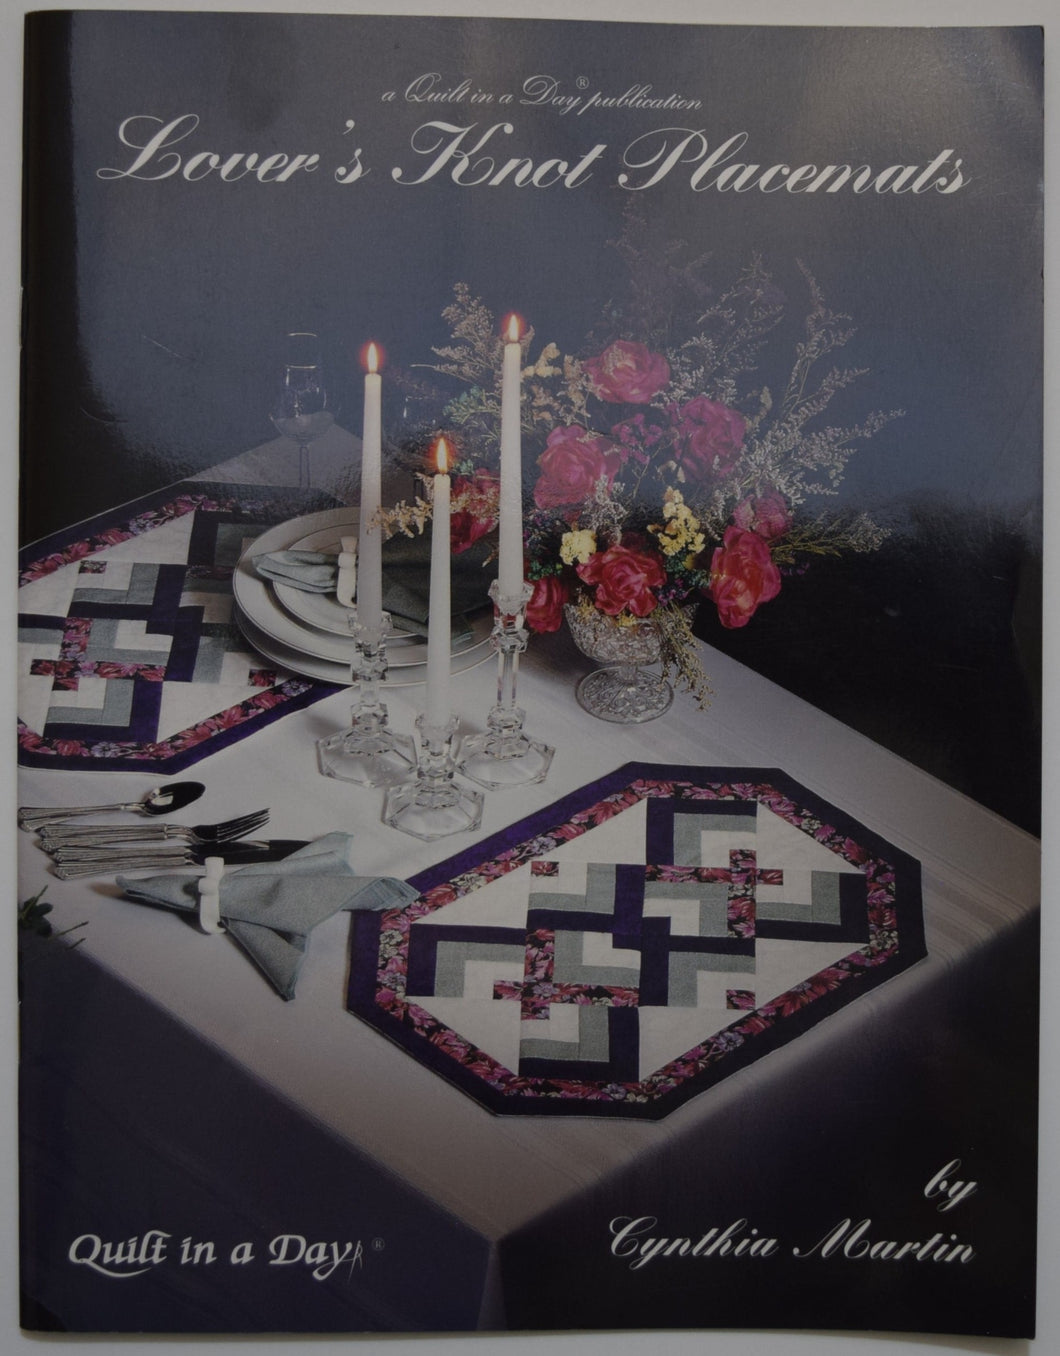 Lover's Knot Placemats by Cynthia Martin